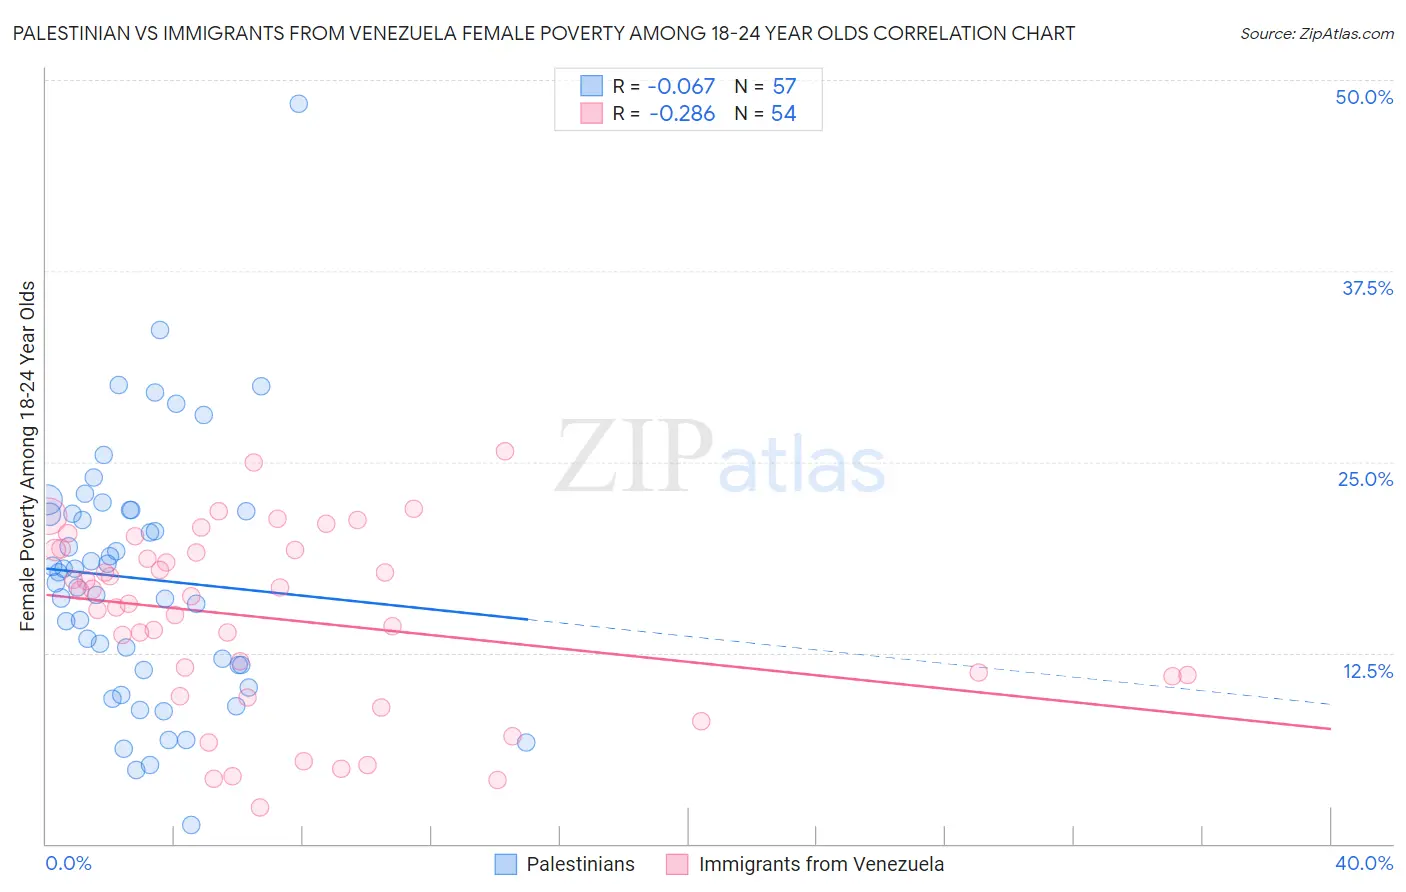 Palestinian vs Immigrants from Venezuela Female Poverty Among 18-24 Year Olds